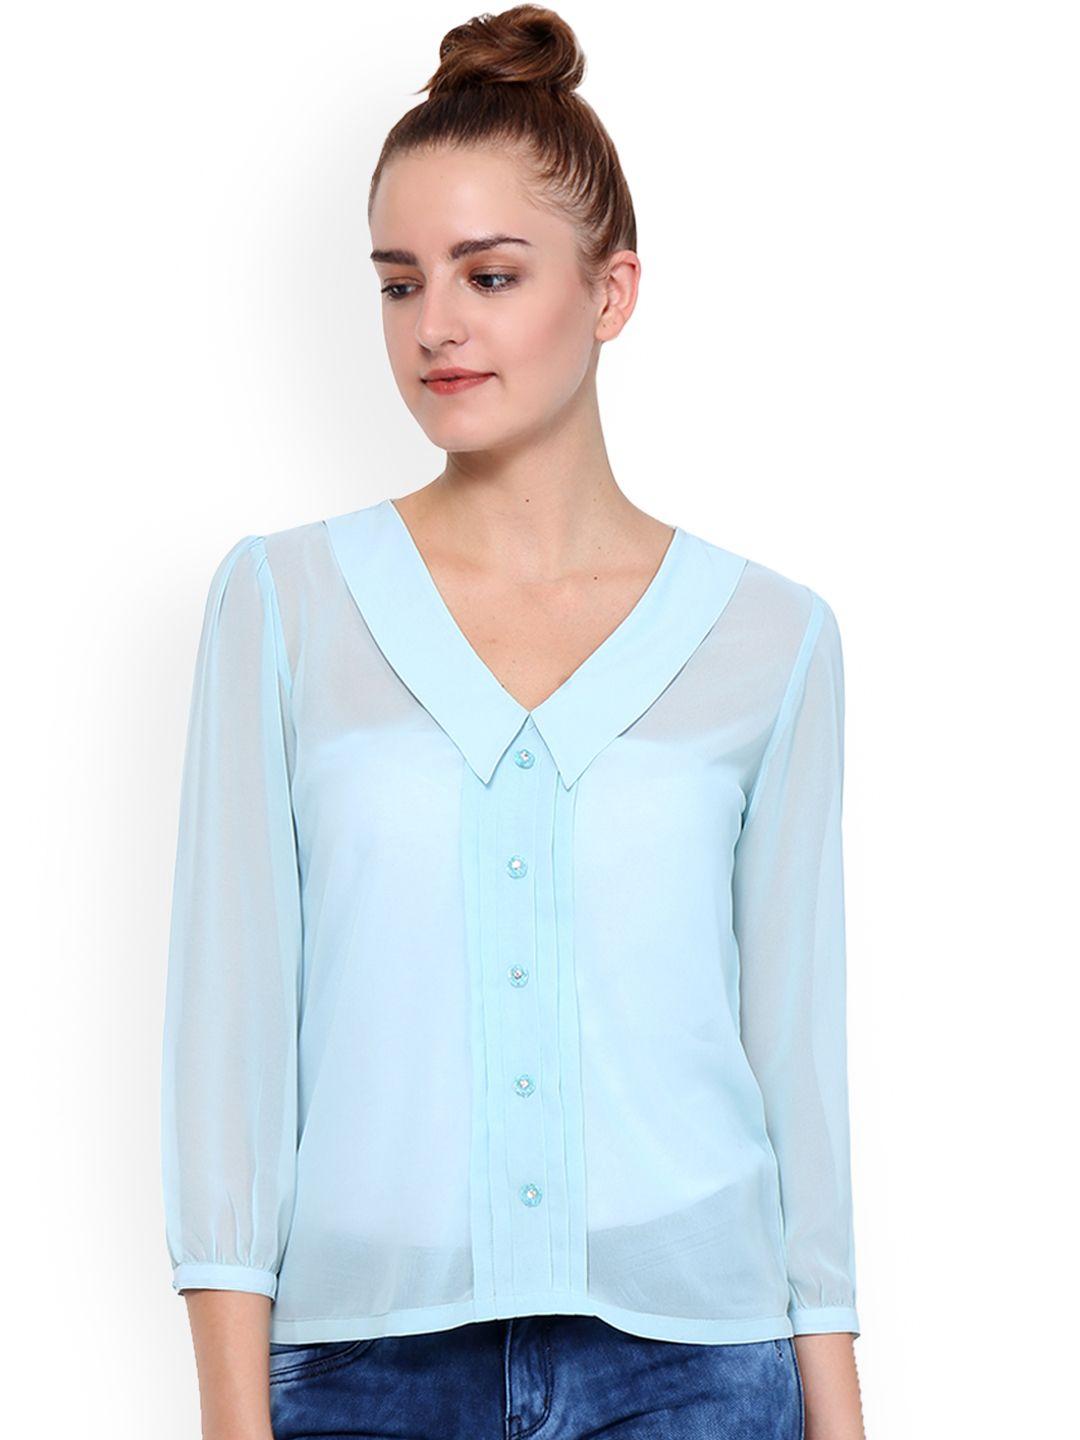 purple state women blue solid shirt style sheer top